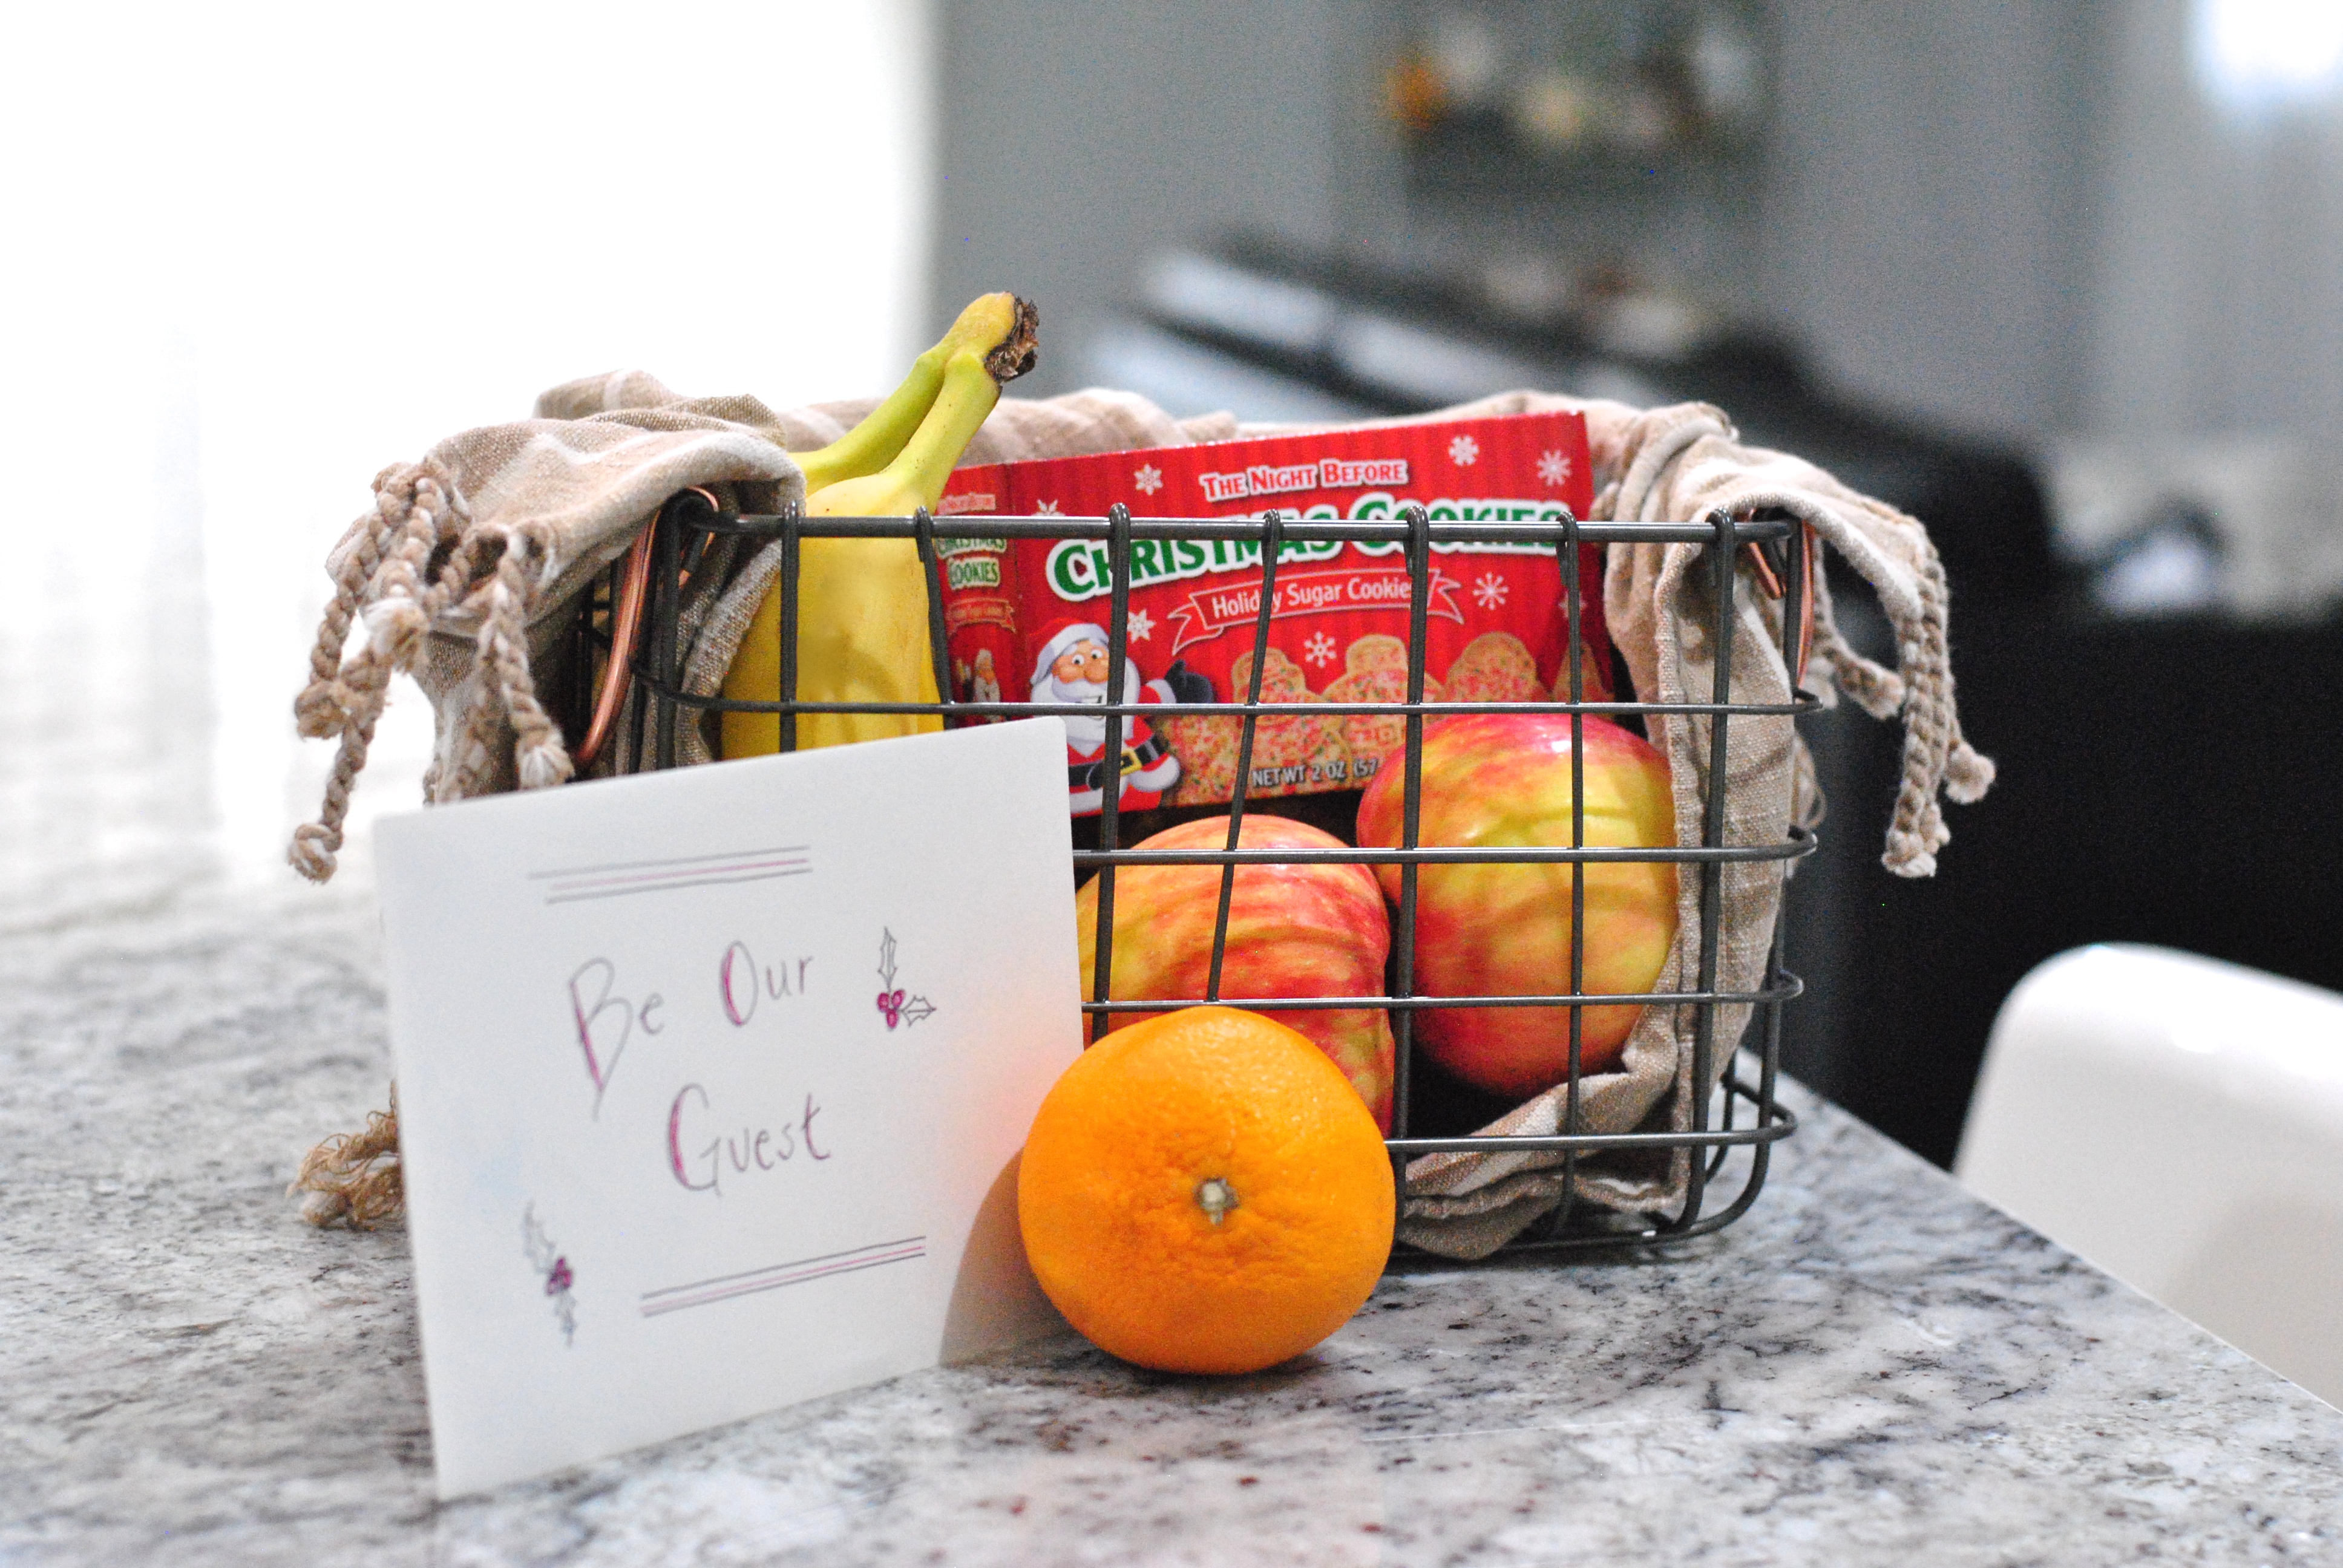 Easy welcome baskets for Airbnb guests